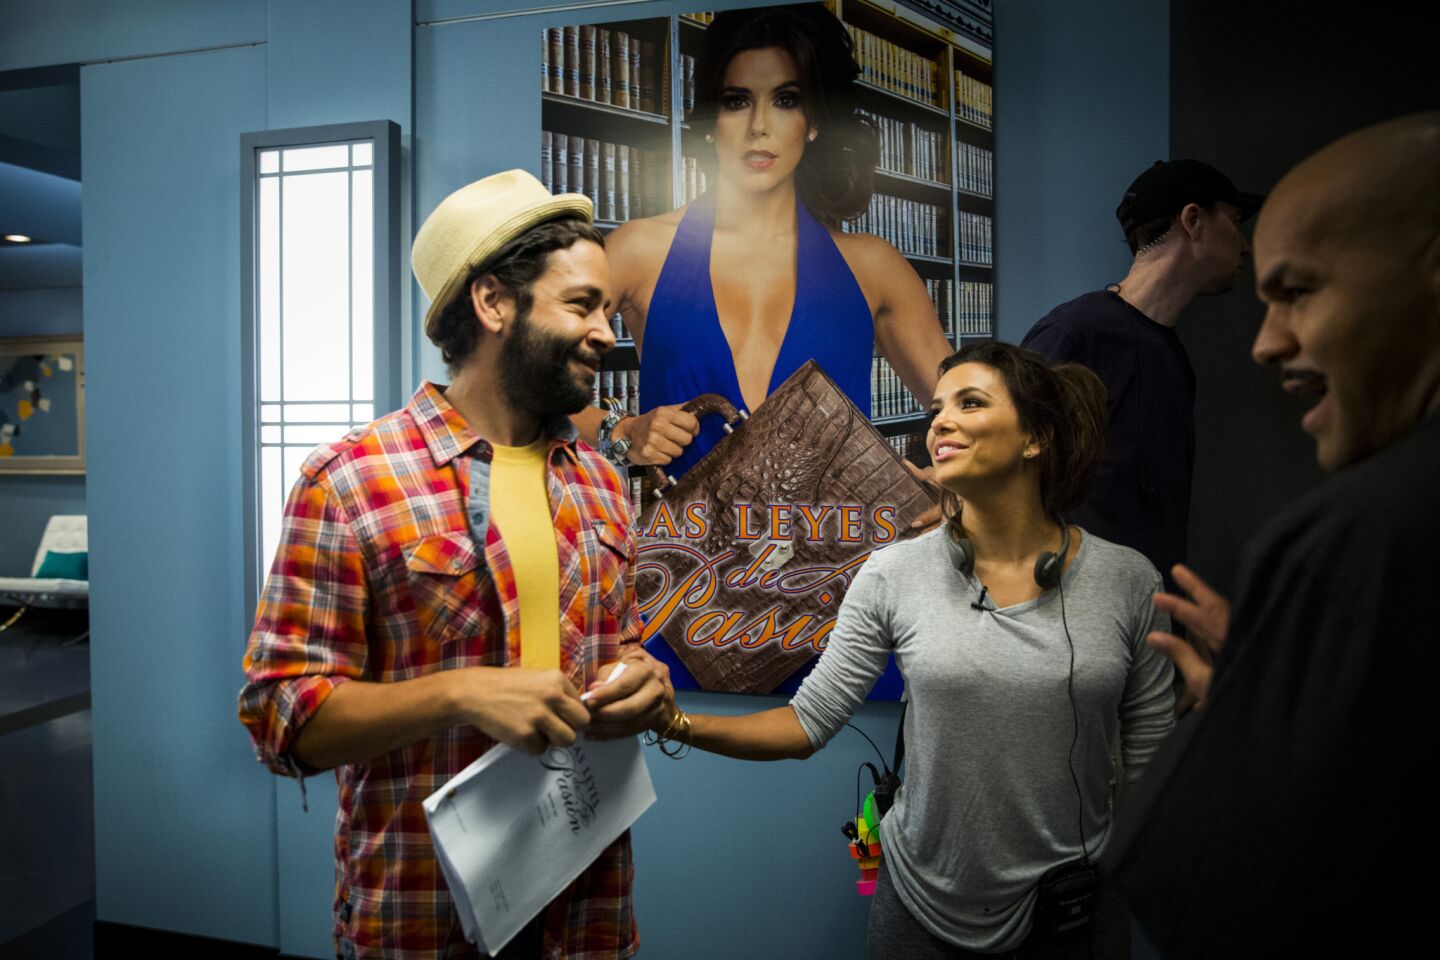 Longoria talks with actors Izzy Diaz, left, and Amaury Nolasco, right, beneath a prop poster of herself between scenes she was directing.